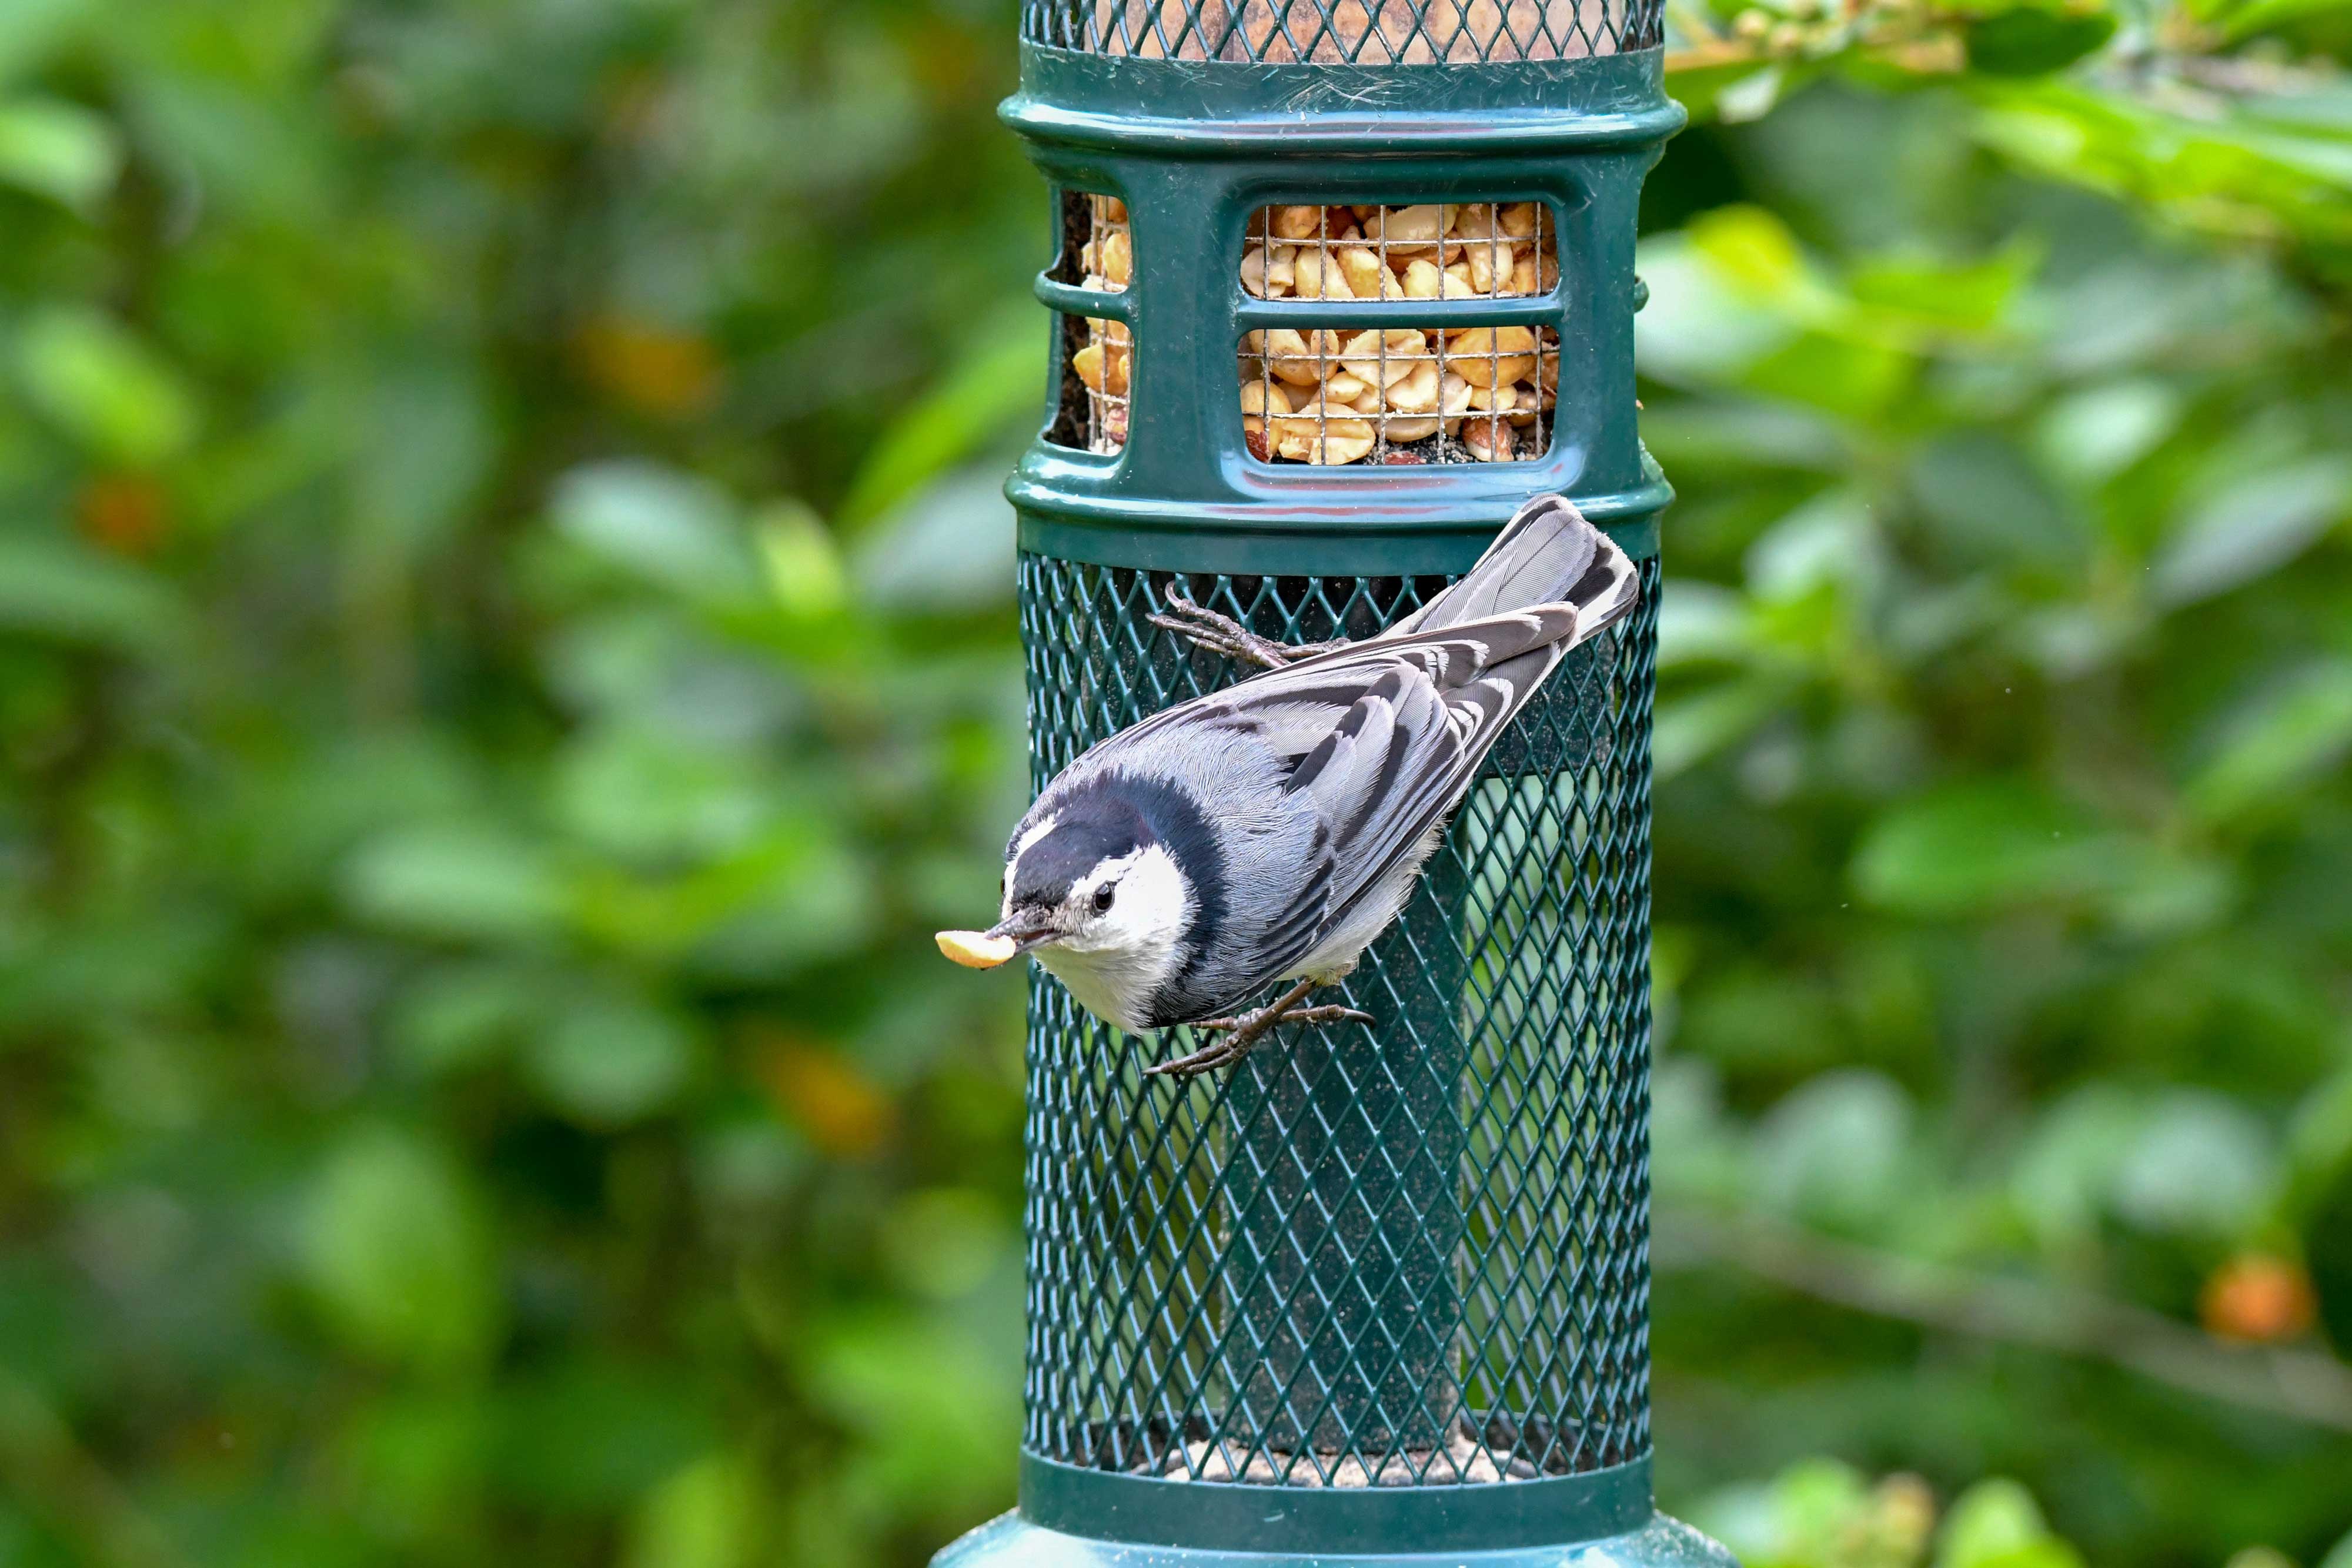 A white-breasted nuthatch at a feeder.